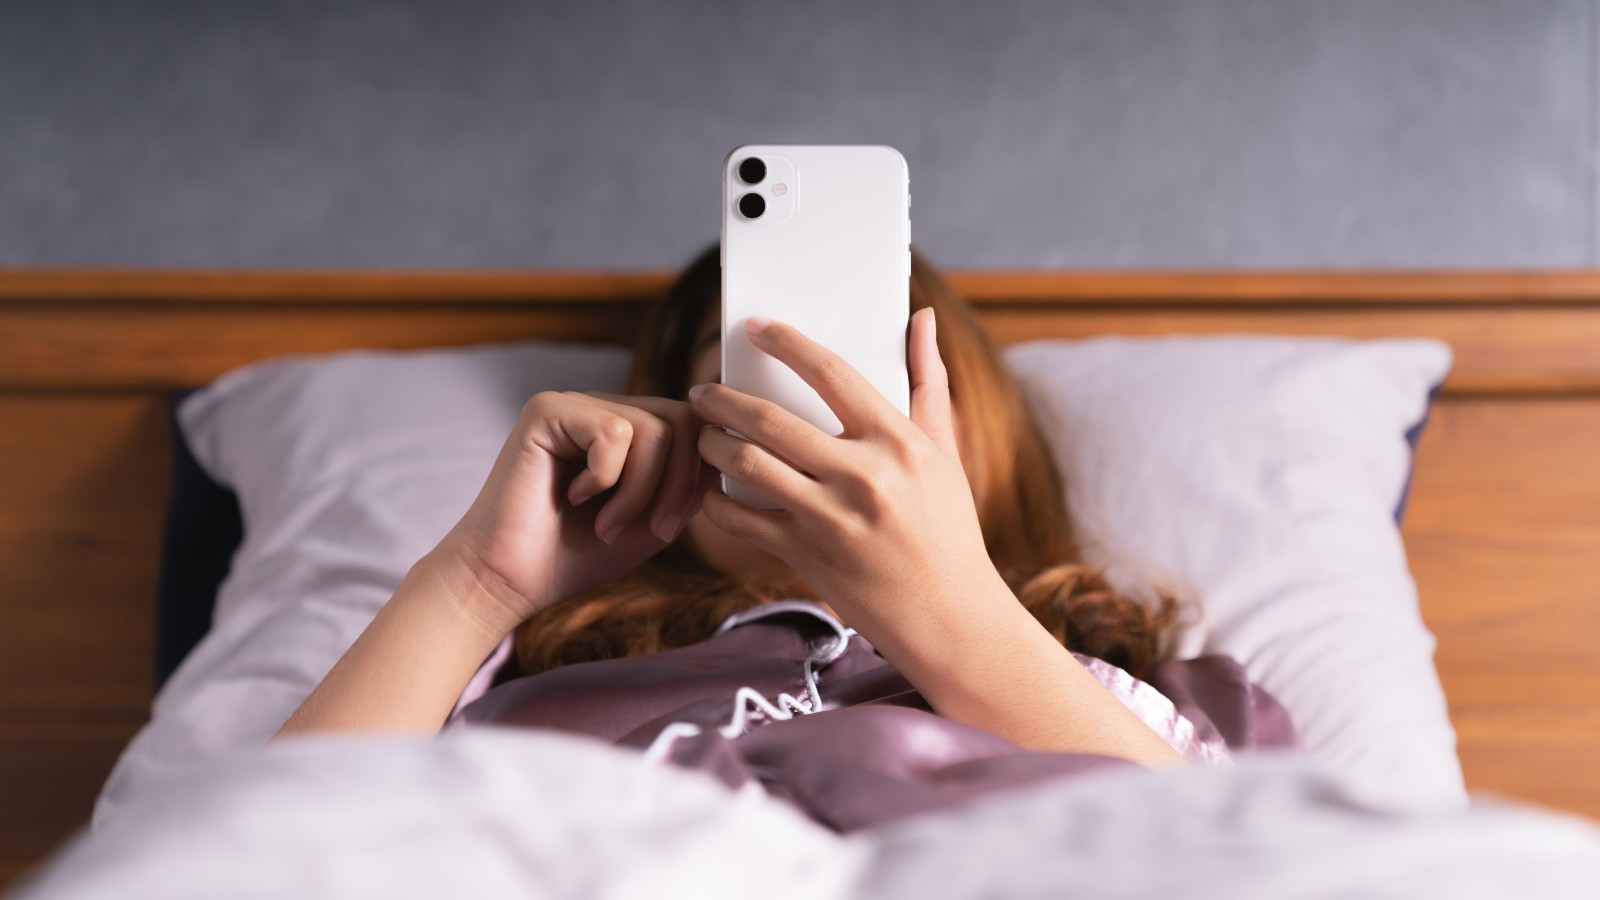 Don't use your cell phone while in bed.